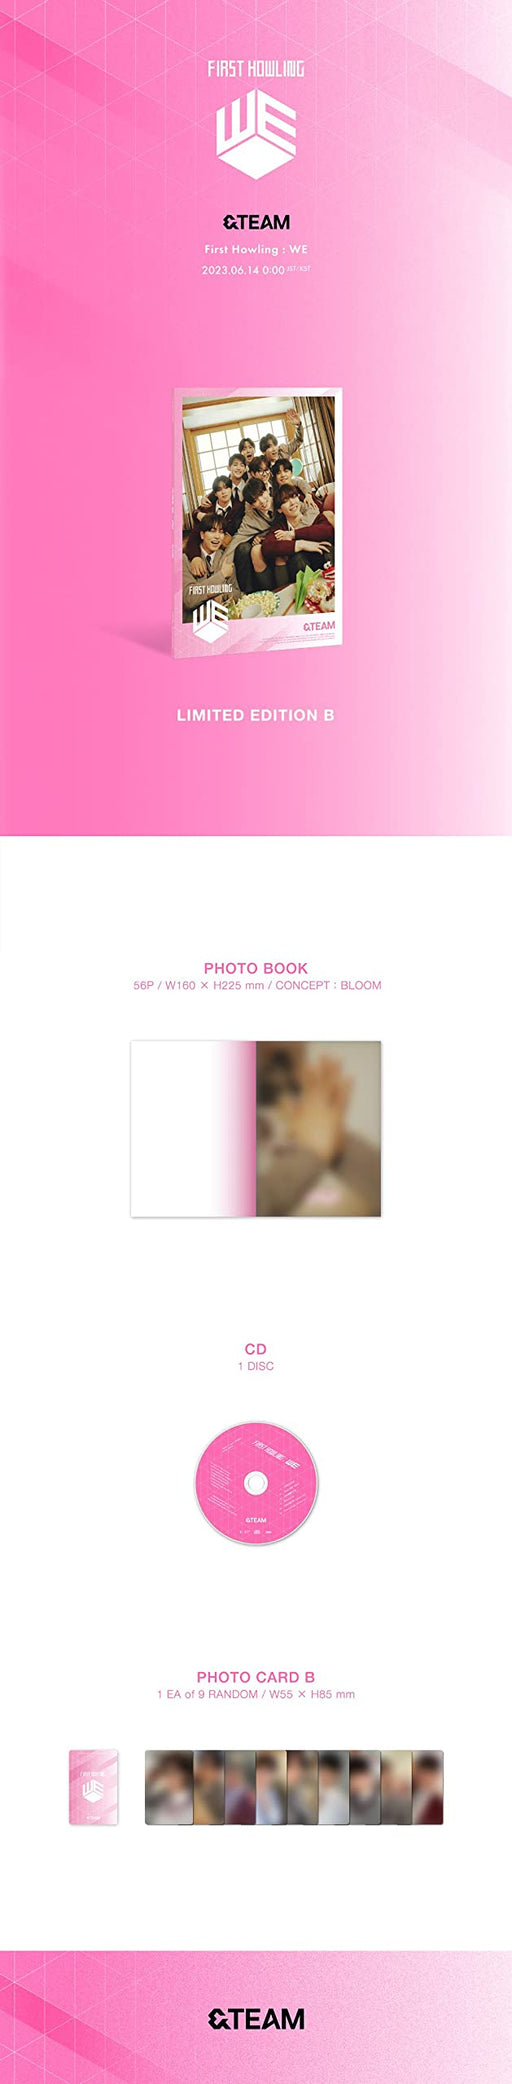 CD First Howling: WE First Edition Type B &TEAM with Photo Book+Card POCS-39025_2